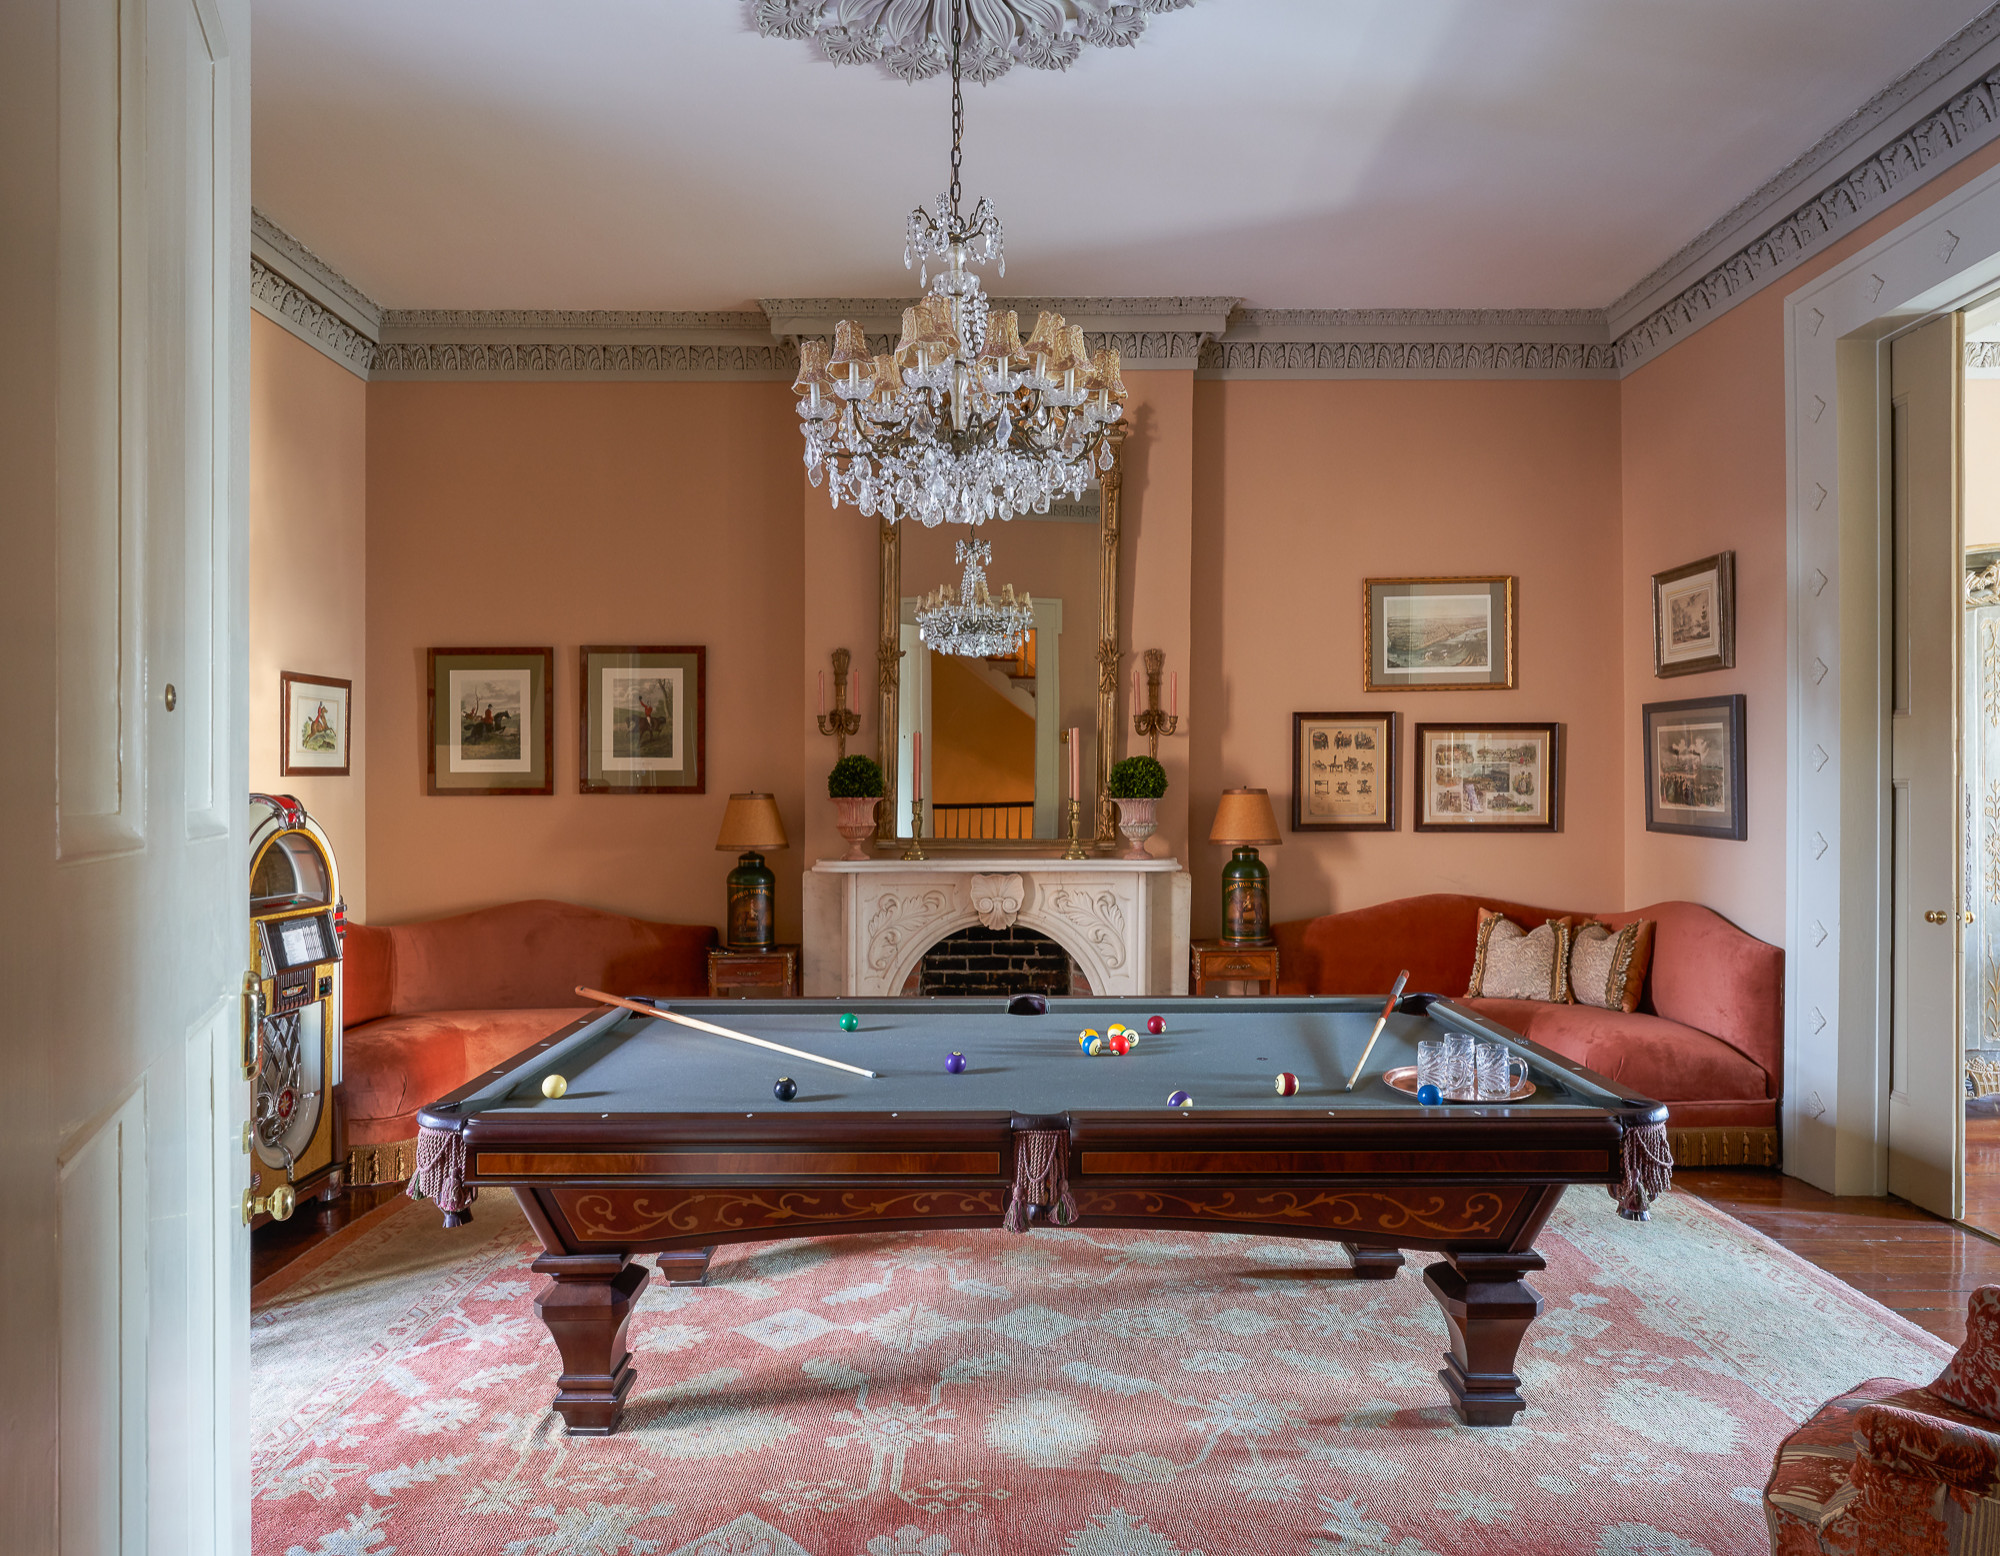 75 Beautiful Game Room Pictures Ideas February 2021 Houzz